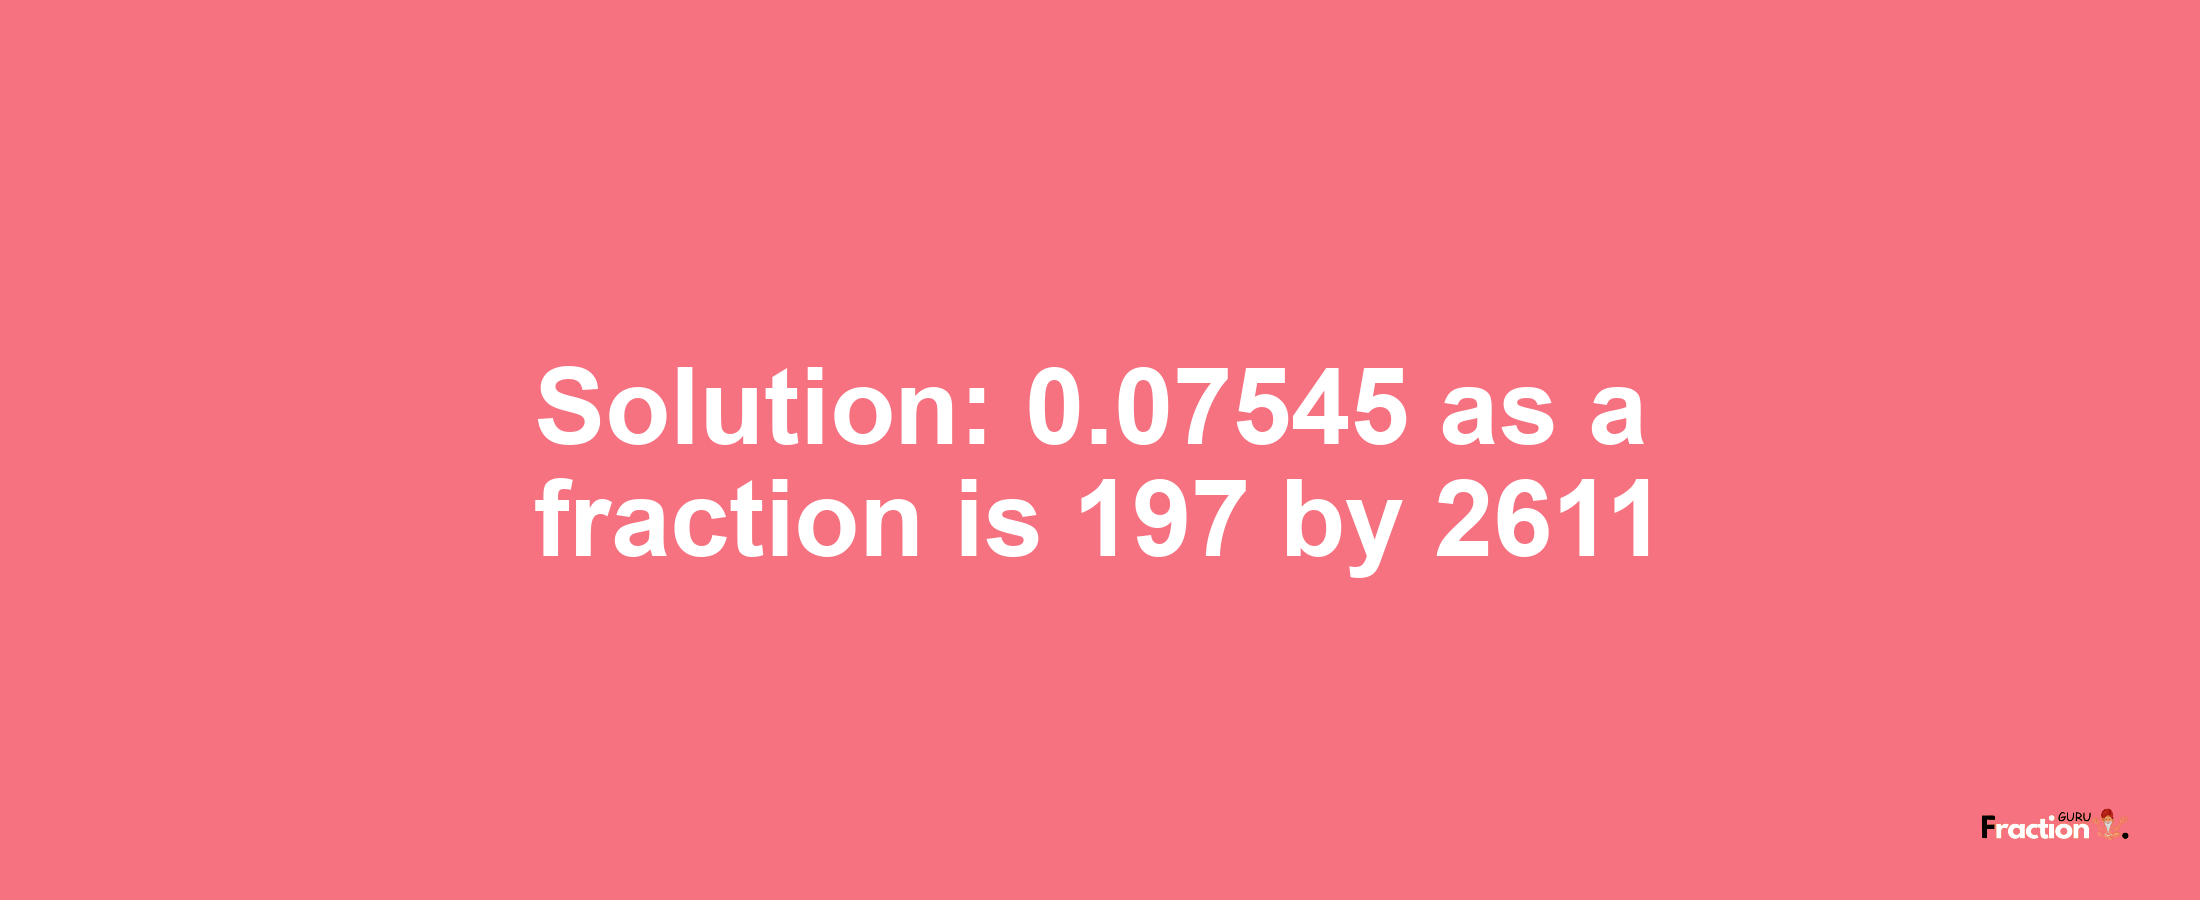 Solution:0.07545 as a fraction is 197/2611